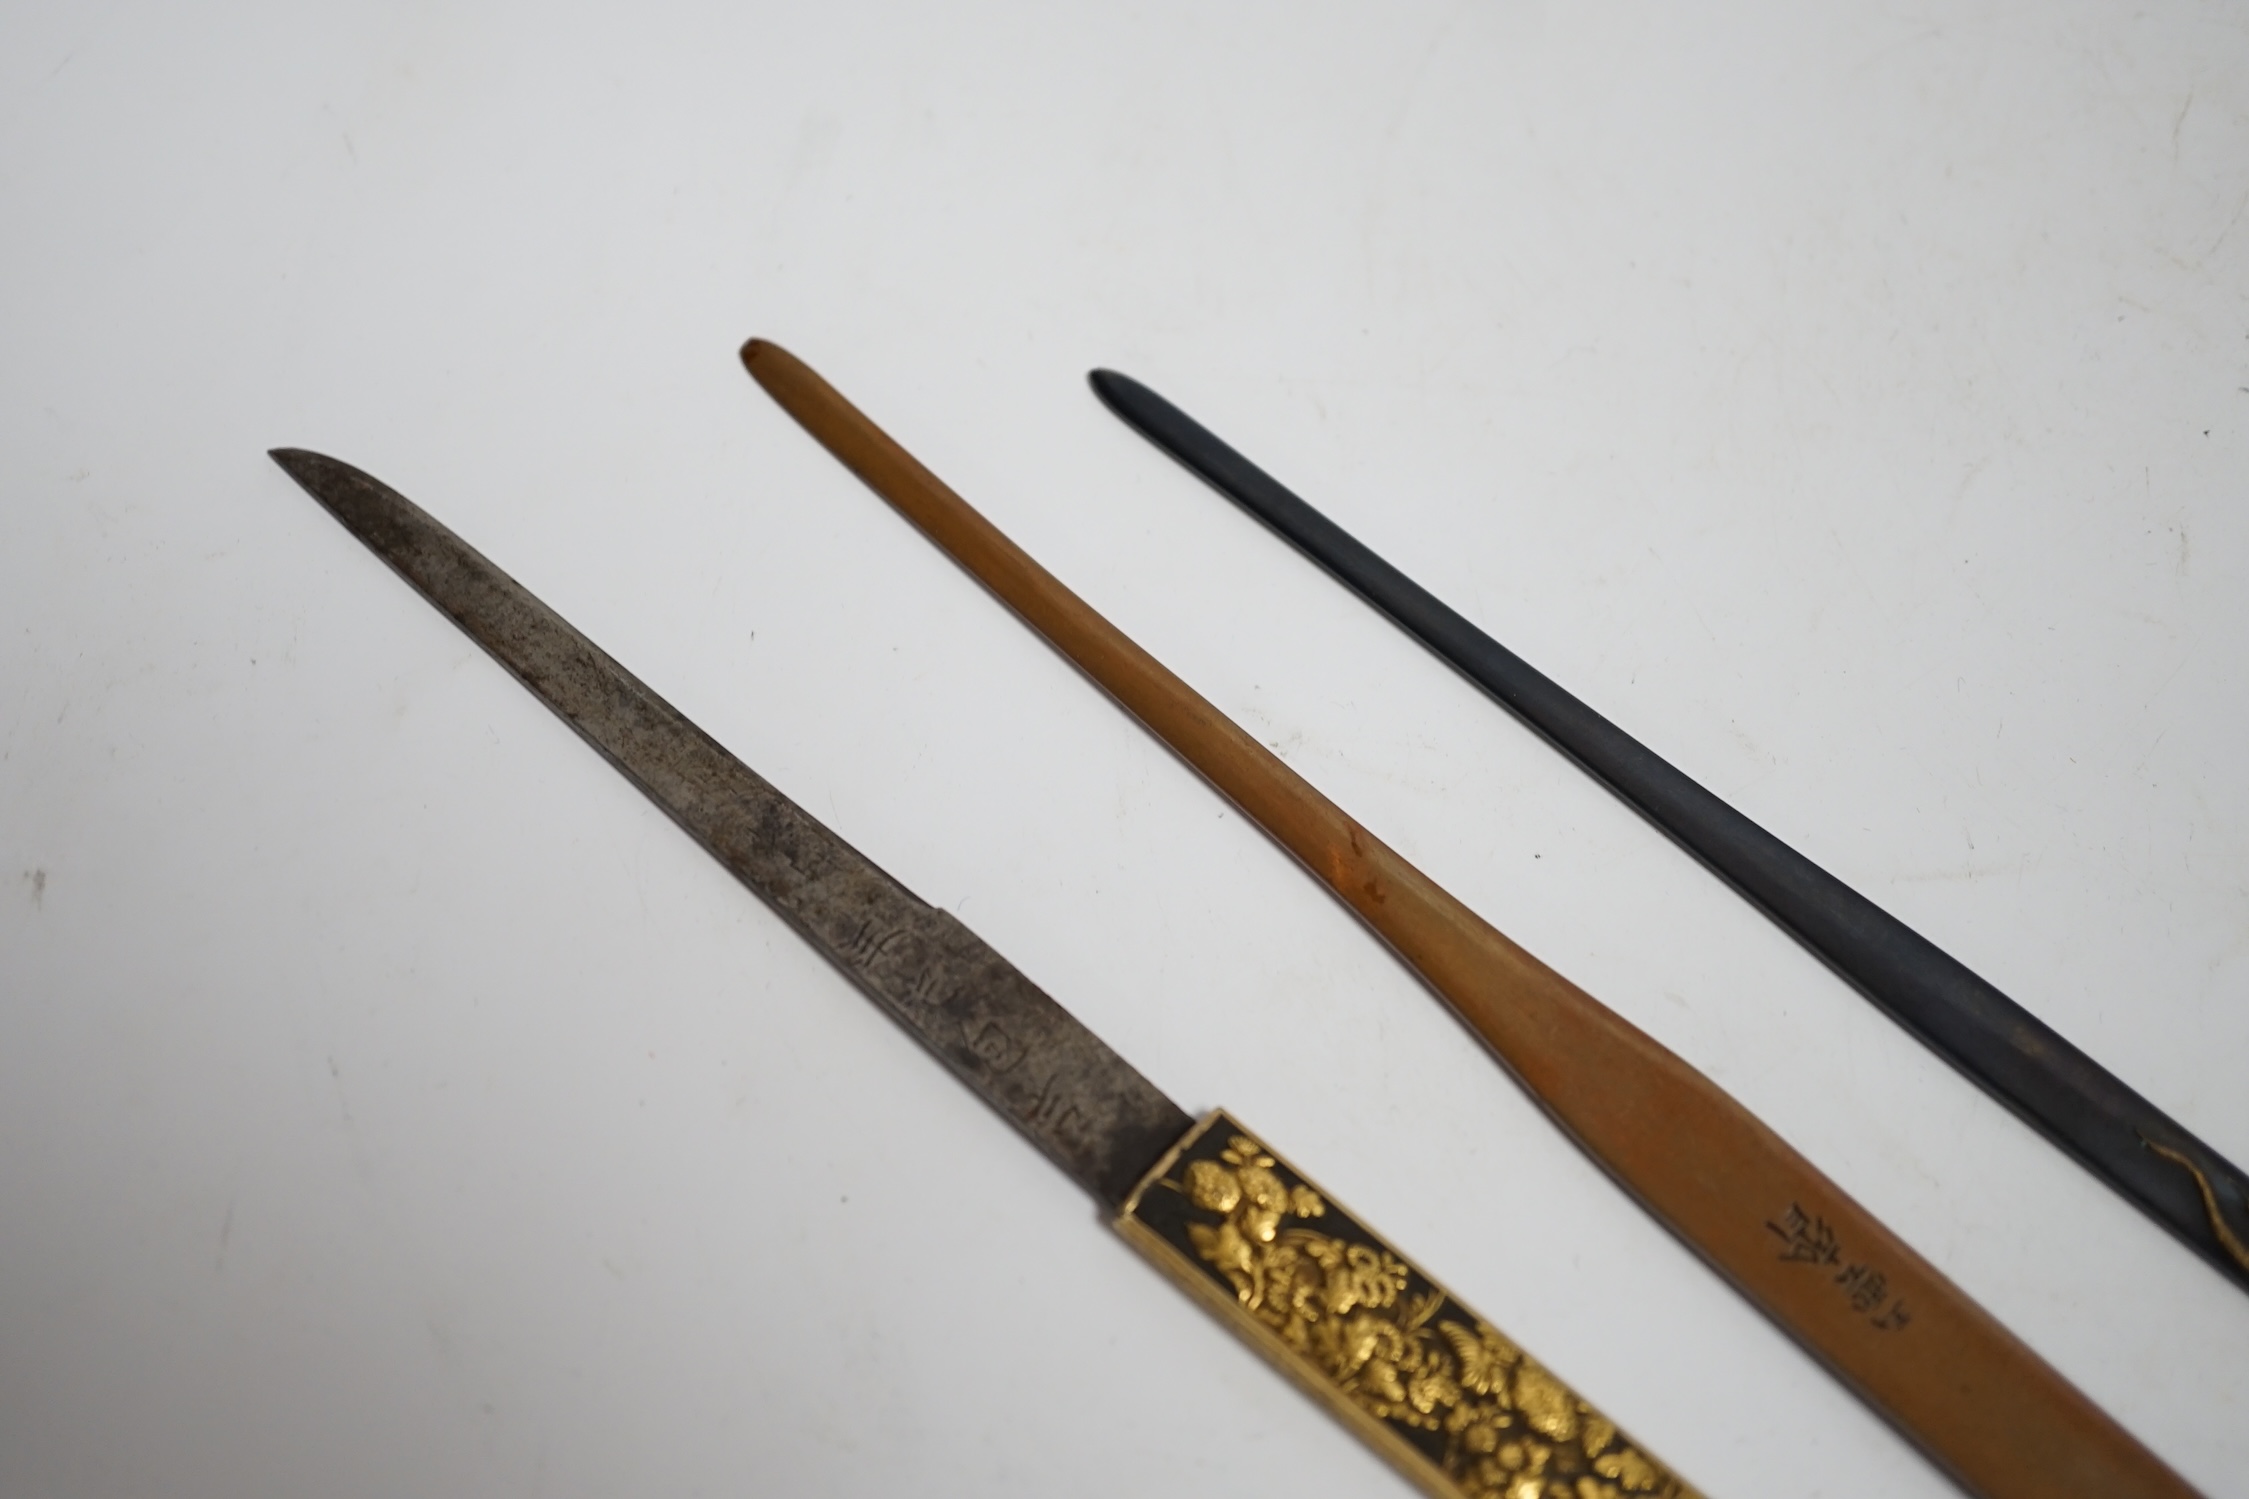 A Japanese kozuka knife with gold overlaid bronze handle, and two Samurai bronze hairpins